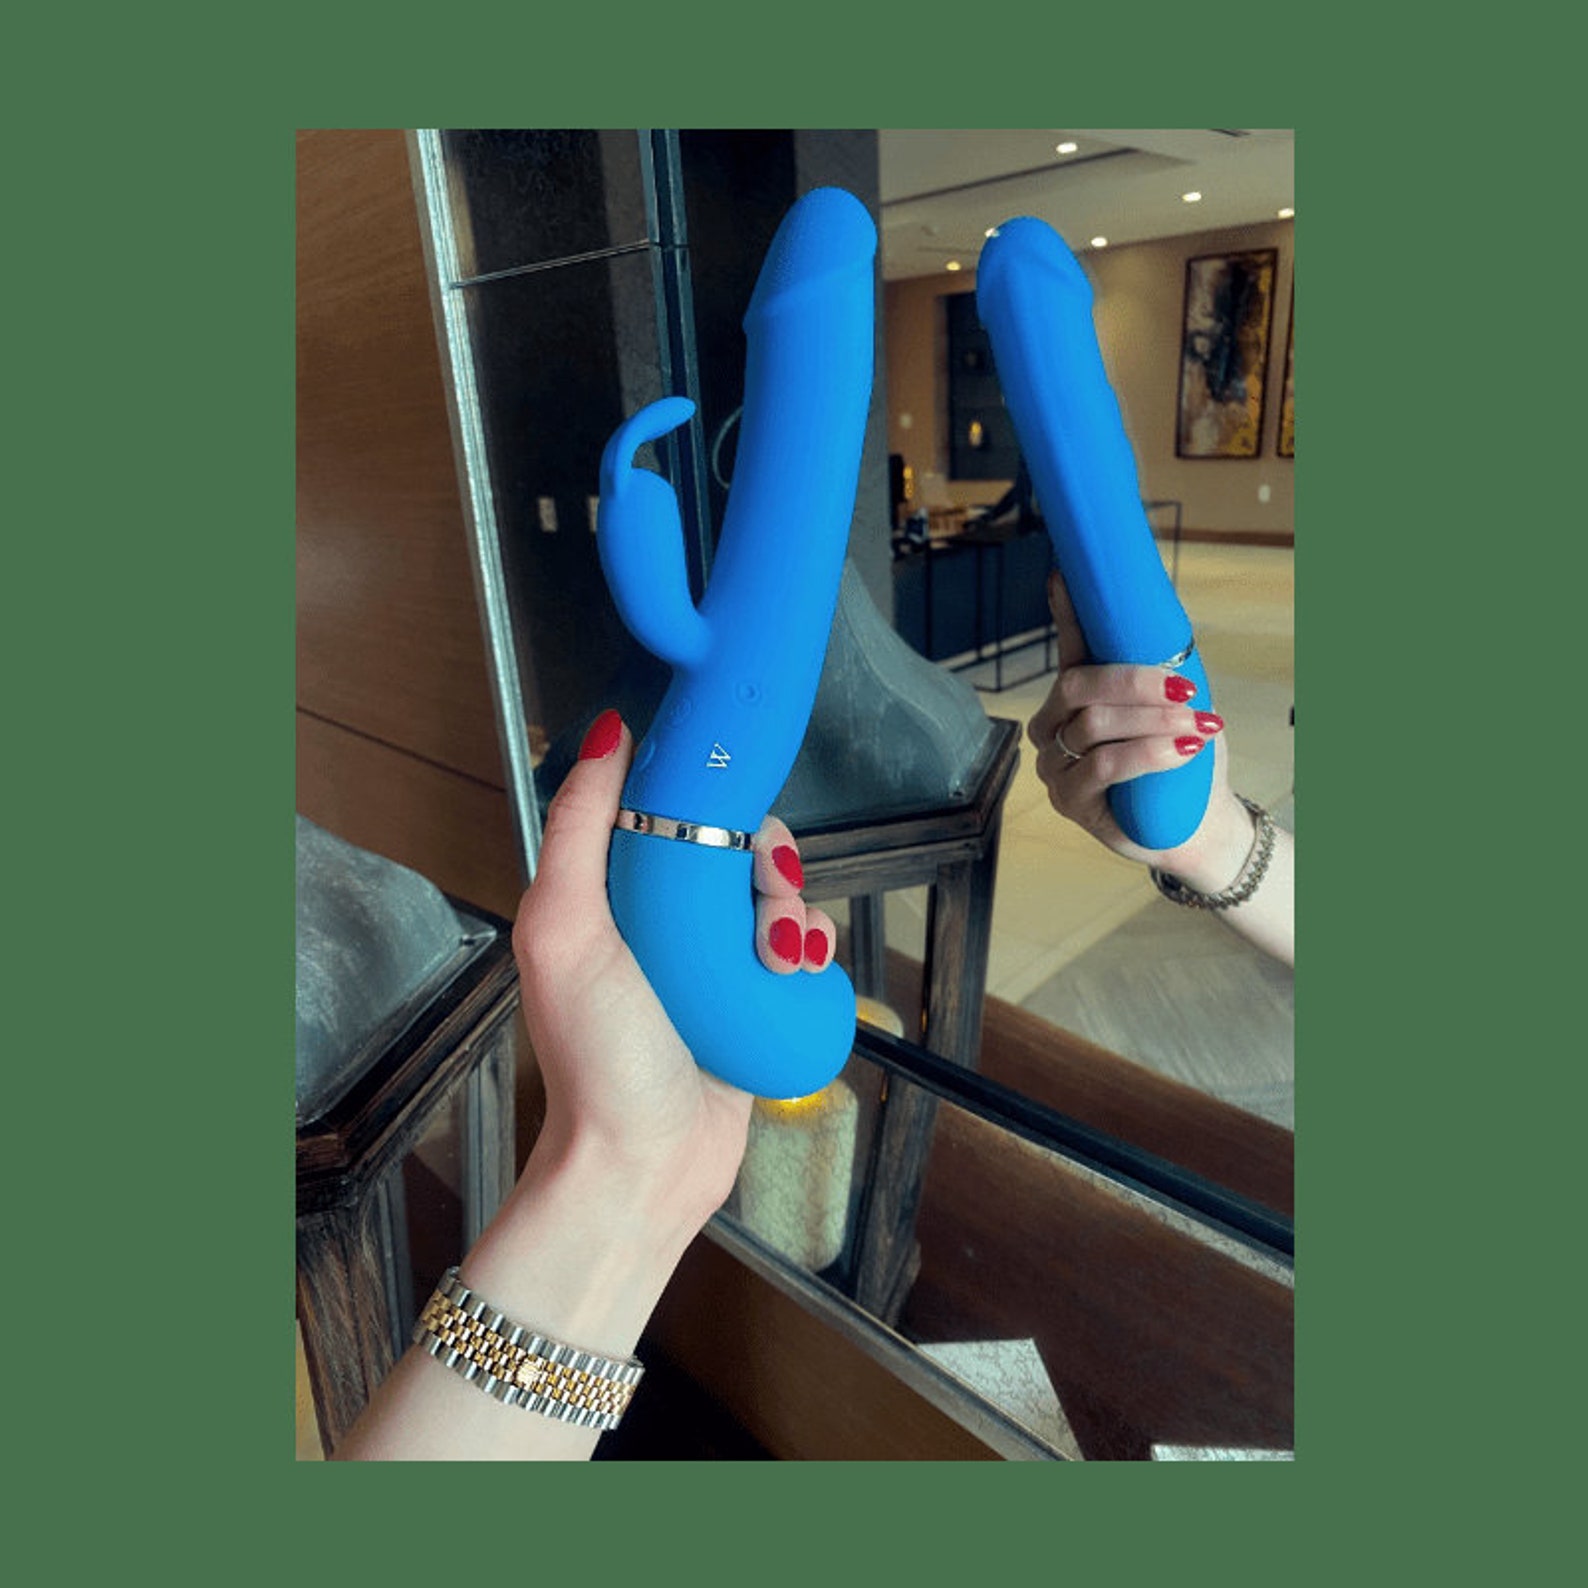 VV The Best Ejaculating Rabbit Vibrator Squirting